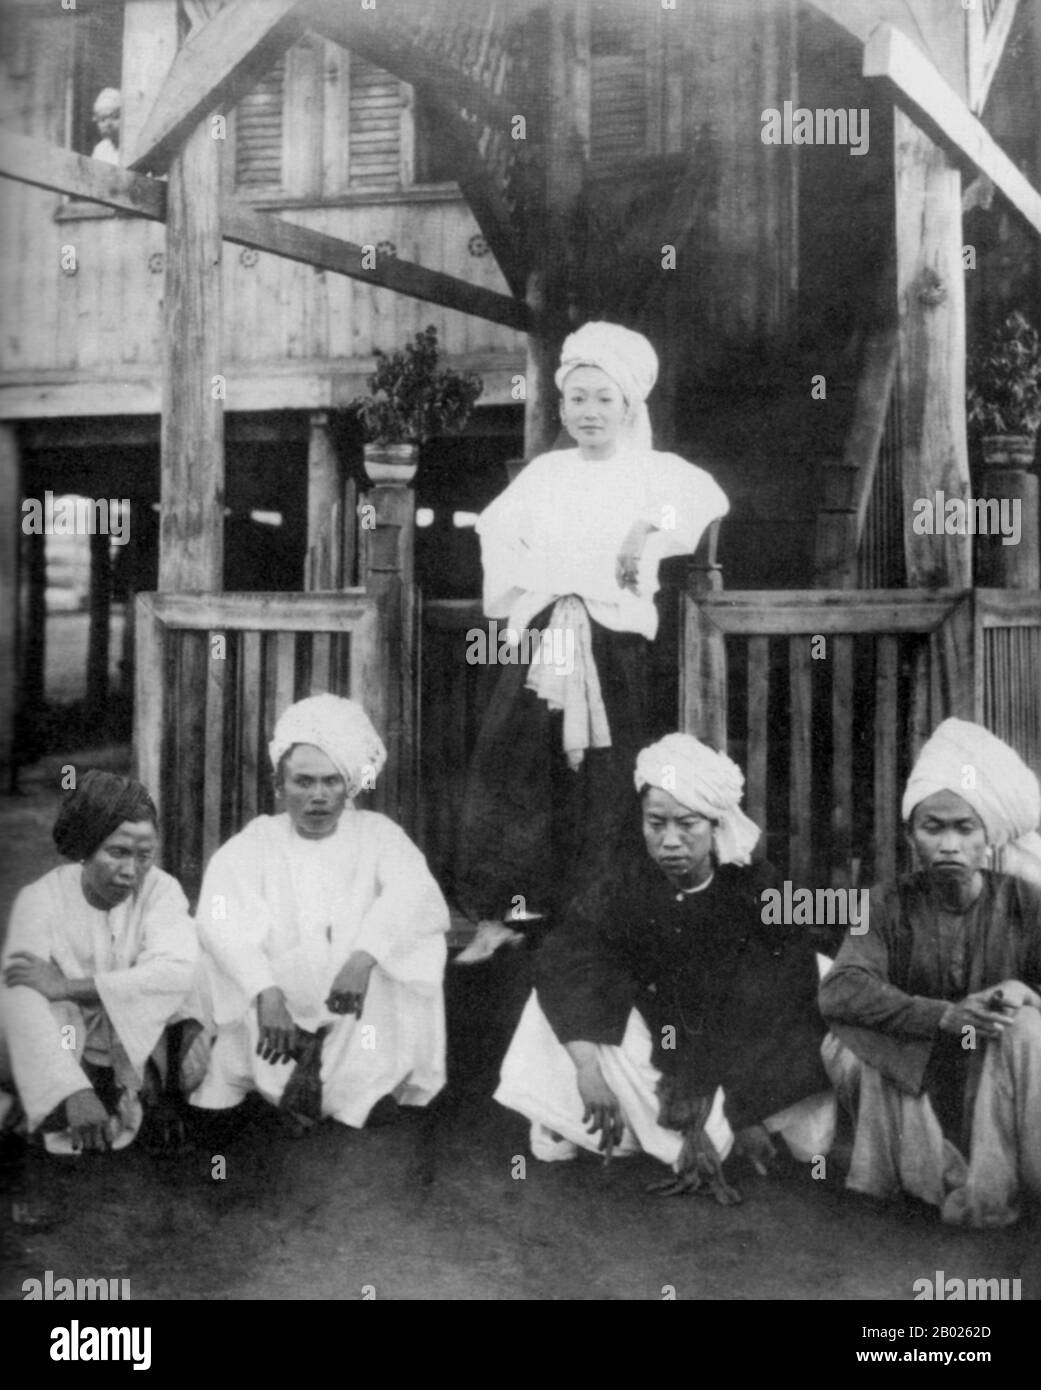 Princess Tip Htila, sister of the 52nd Saopha (ruling prince) of the Shan State of Kengtung, and also of the 53rd Saopha, Kawng Kiao Intaleng. Along with Sao Kawng Kiao Intaleng she attended the Delhi Durbar in 1903, in celebration of the coronation of Edward VII. She was a shrewd and powerful businesswoman, involved in sales of elephants and motor cars, and later in teak extraction and road-building.  Tip Htila divorced her first husband, who was Saopha of the Shan State of Keng Hkam, and outlived her second husband. According to Maurice Collis, who met her in her old age, 'in her day she mus Stock Photo